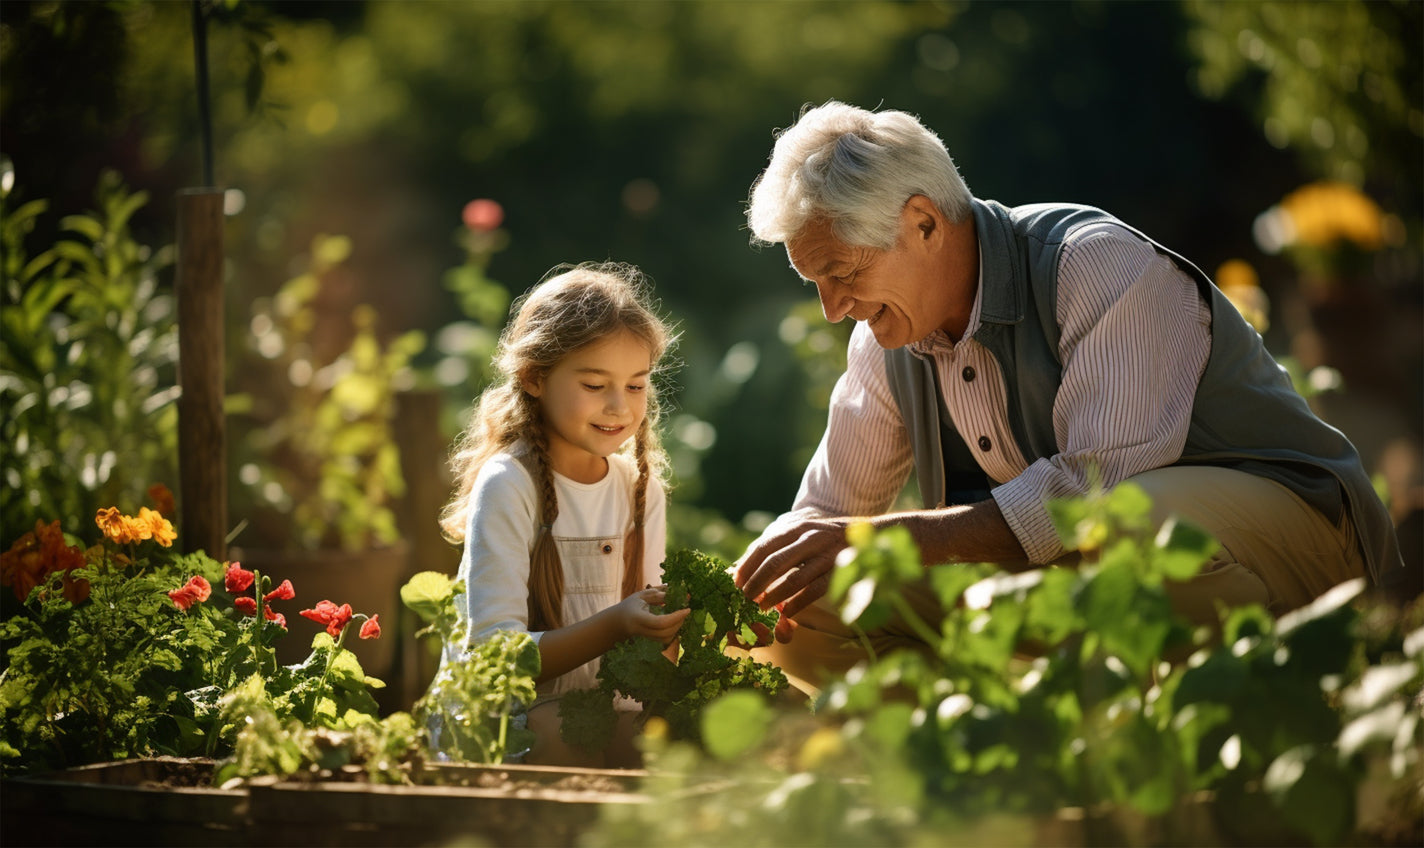 Cultivating Wellness:  The Health Benefits of Gardening